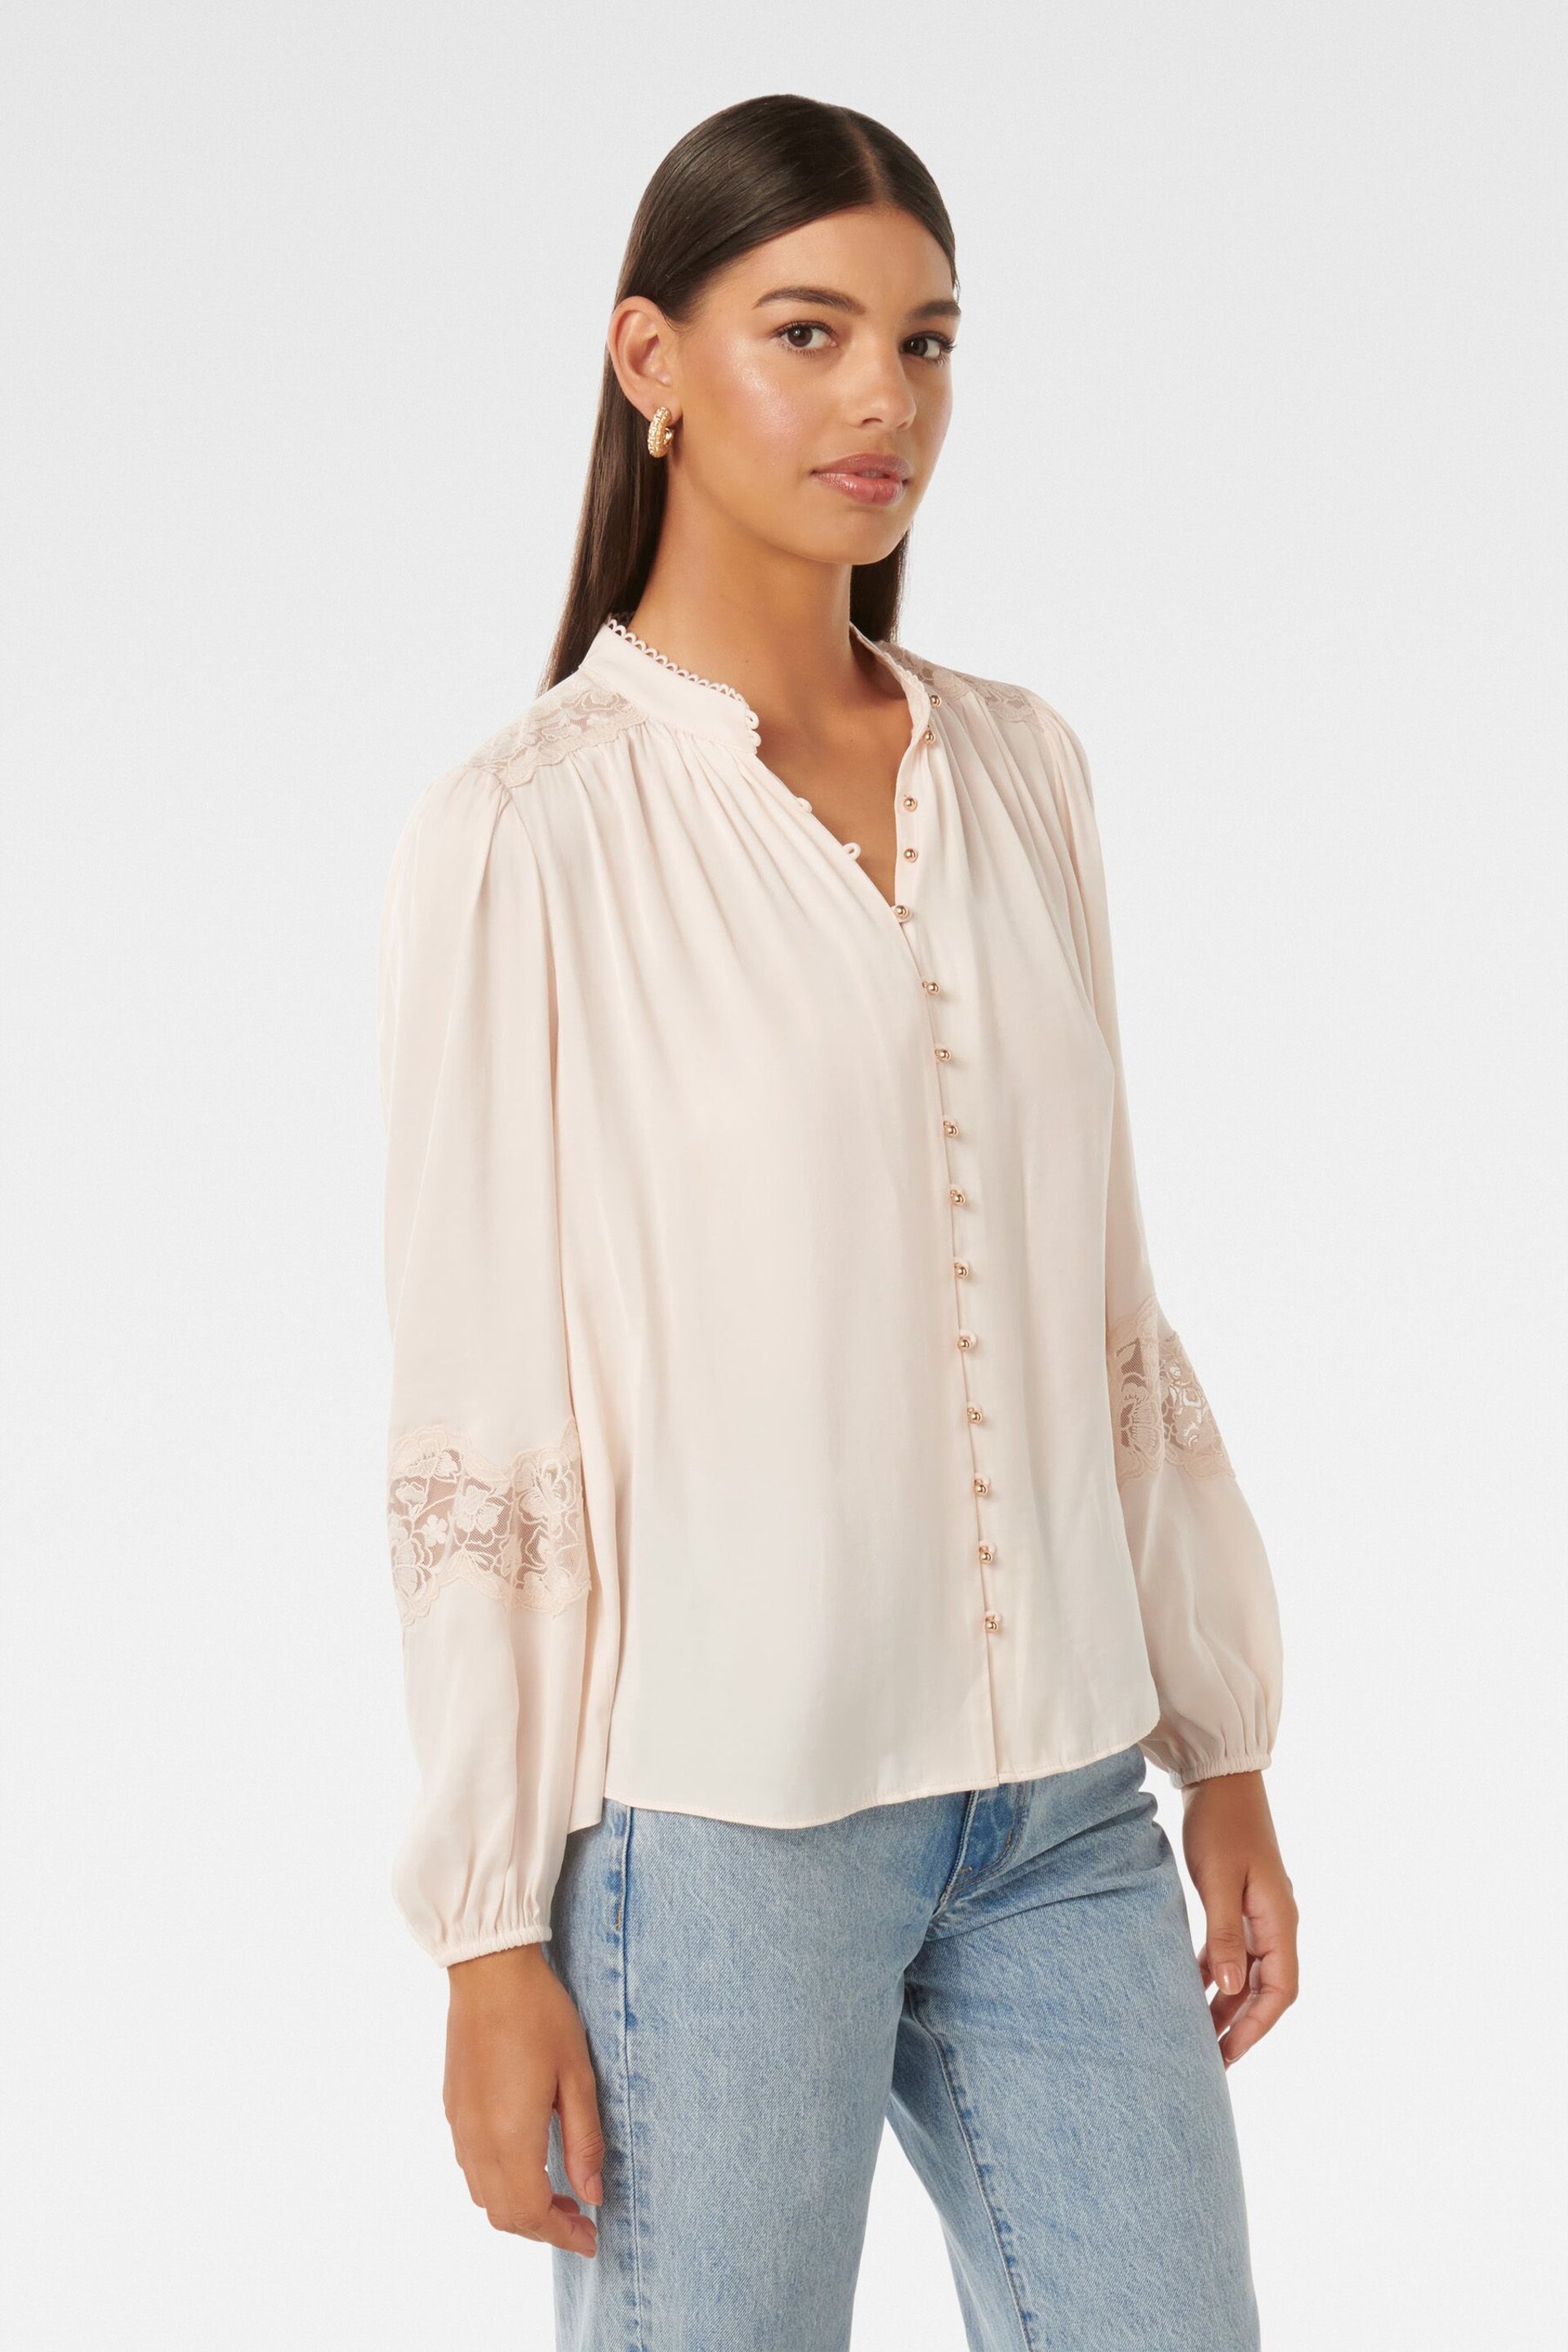 Forever New Cream Annalise Lace Sleeves Blouse - Image 3 of 5